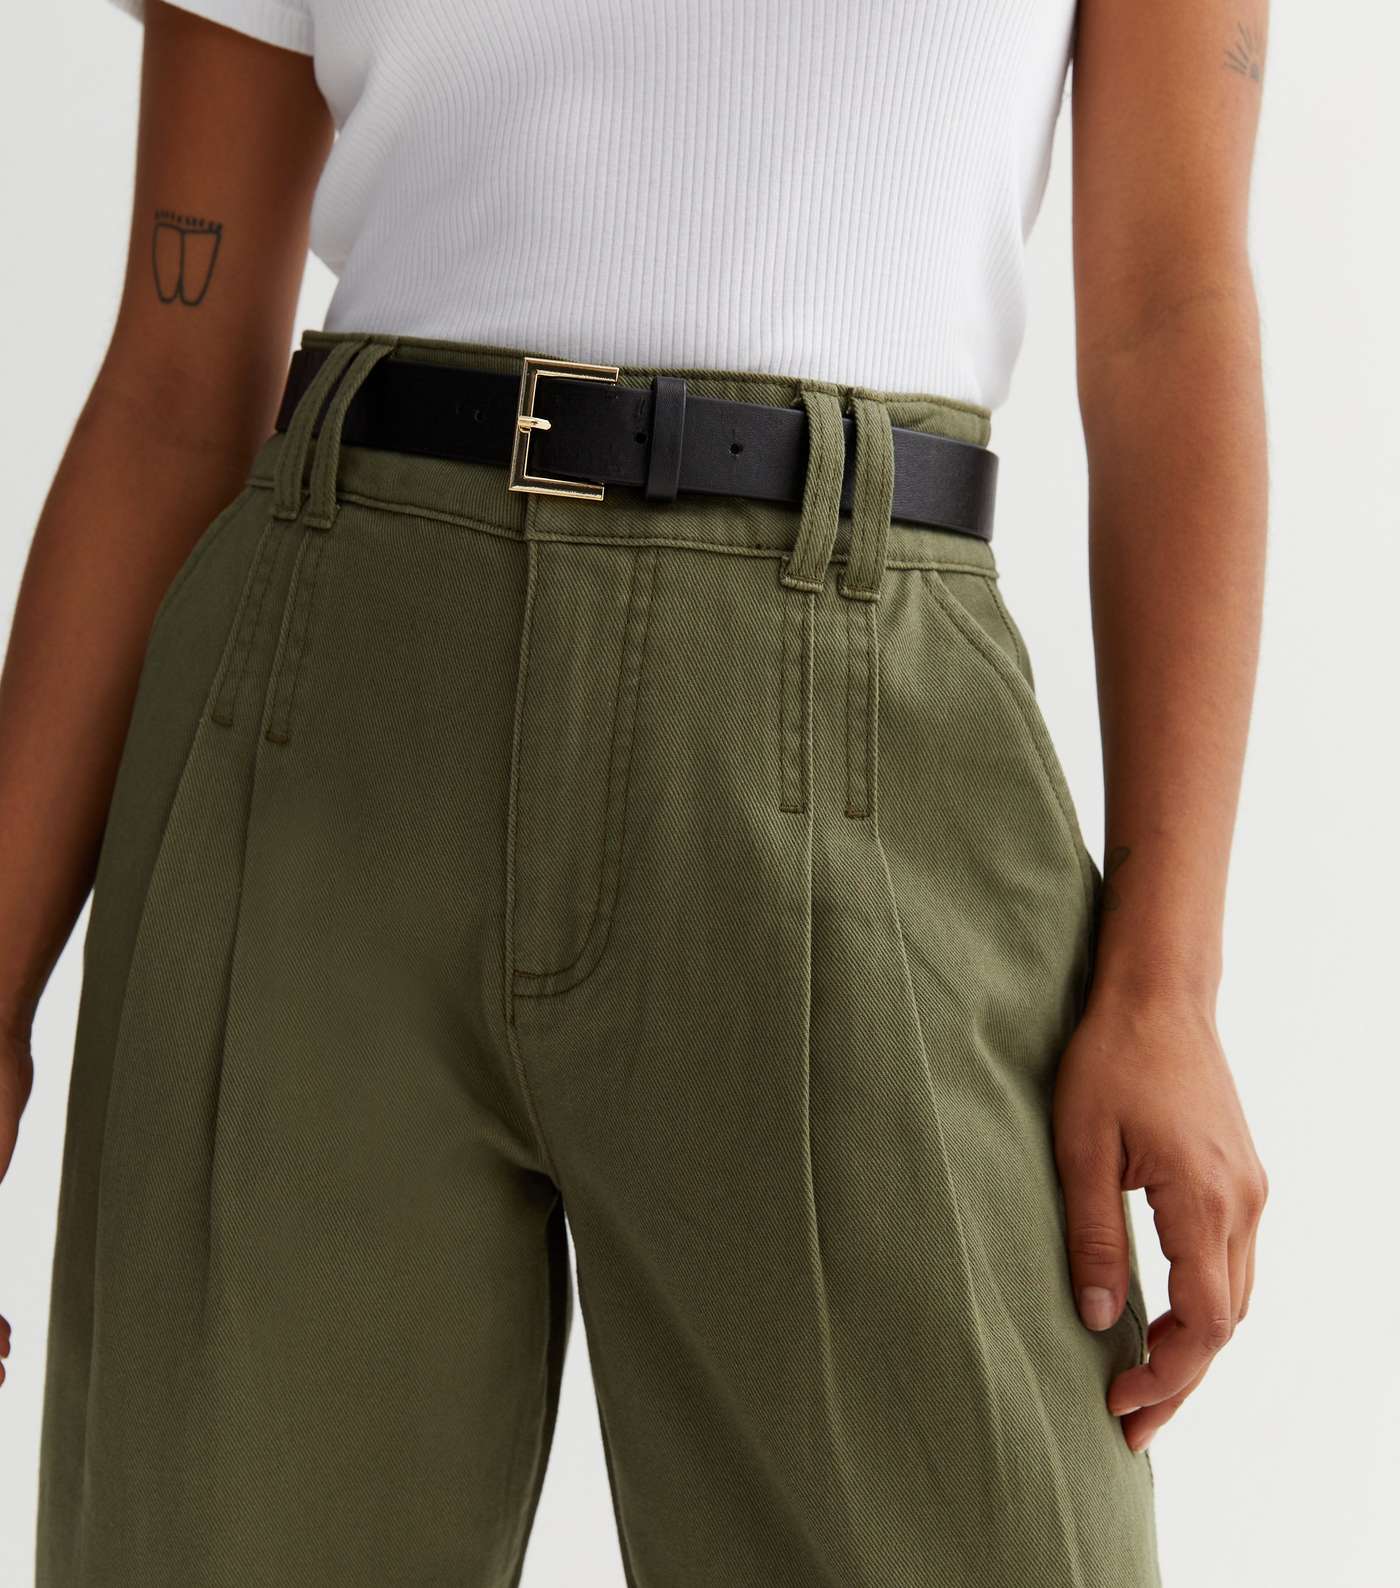 Petite Khaki Cotton Belted Crop Trousers Image 2